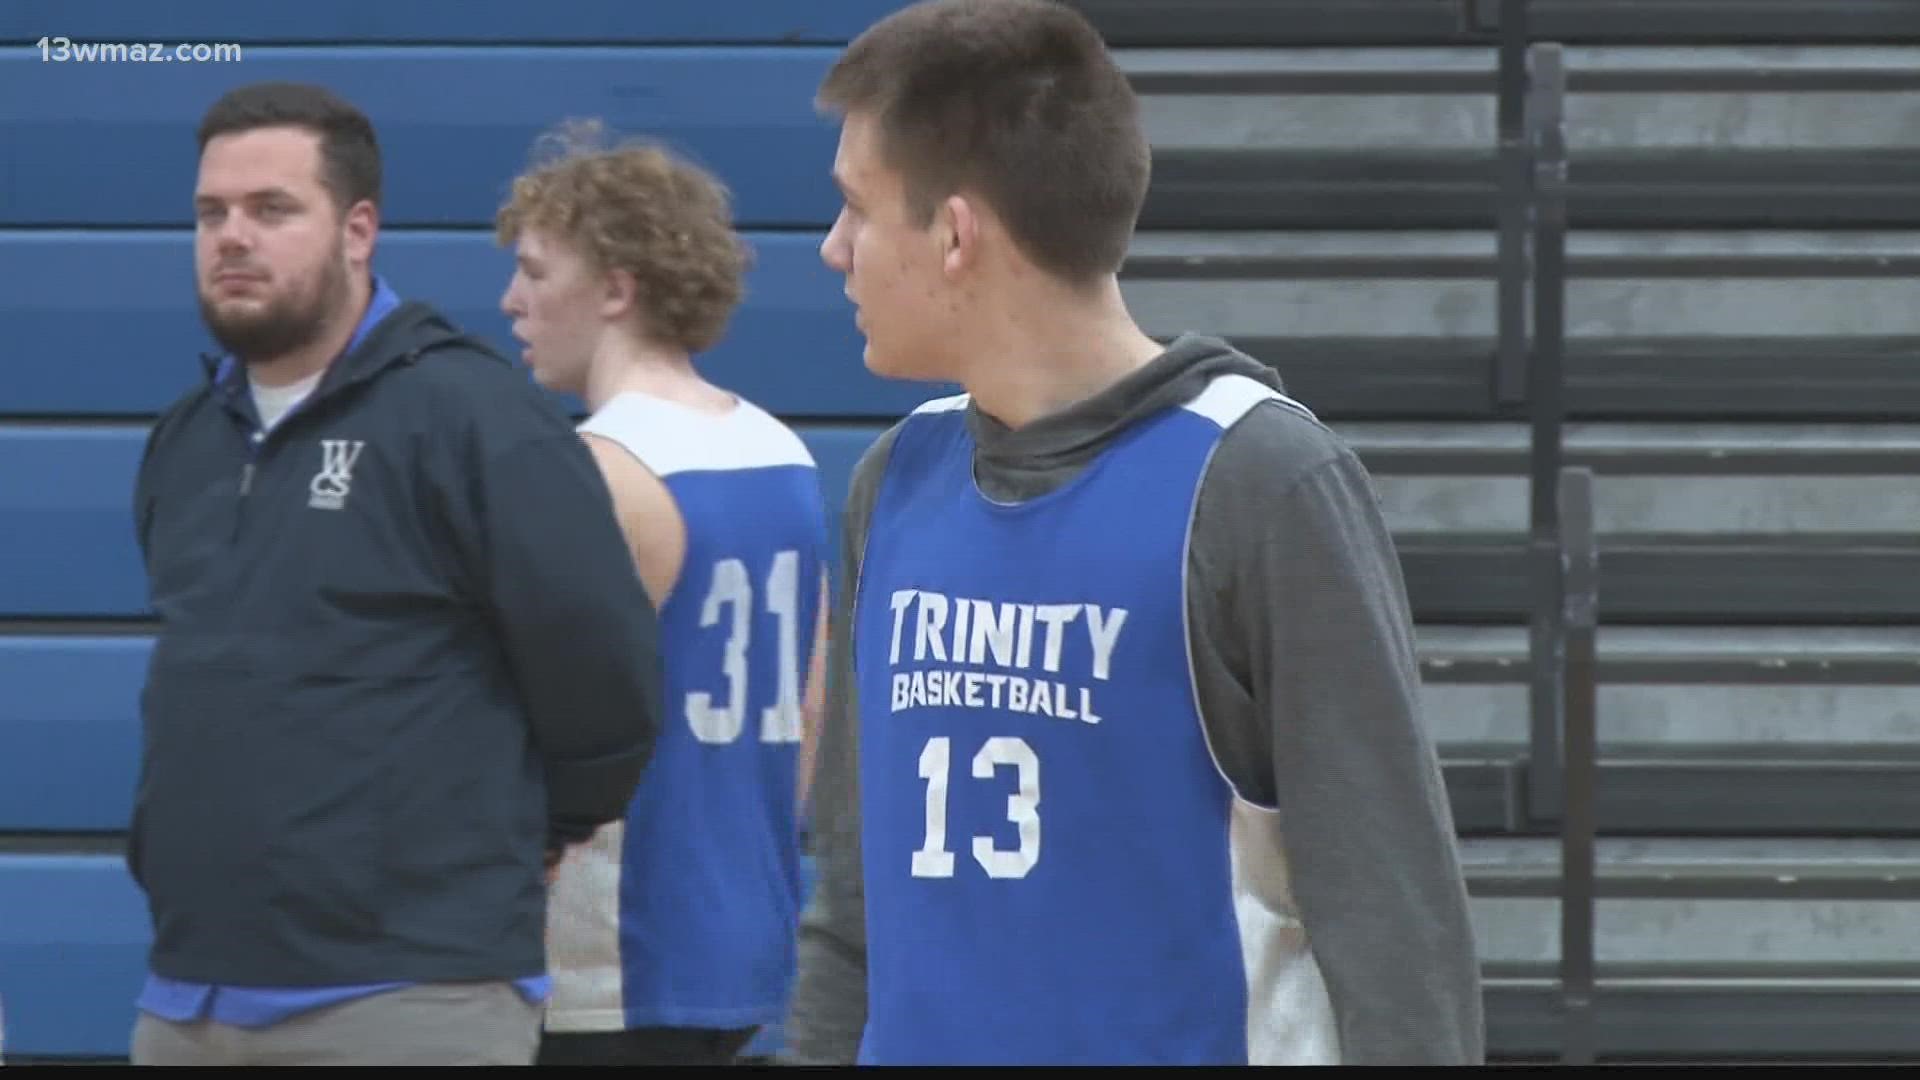 If Trinity Christian goes on to win its first region title since 1989, a couple of lifelong friends will have something to do with it.